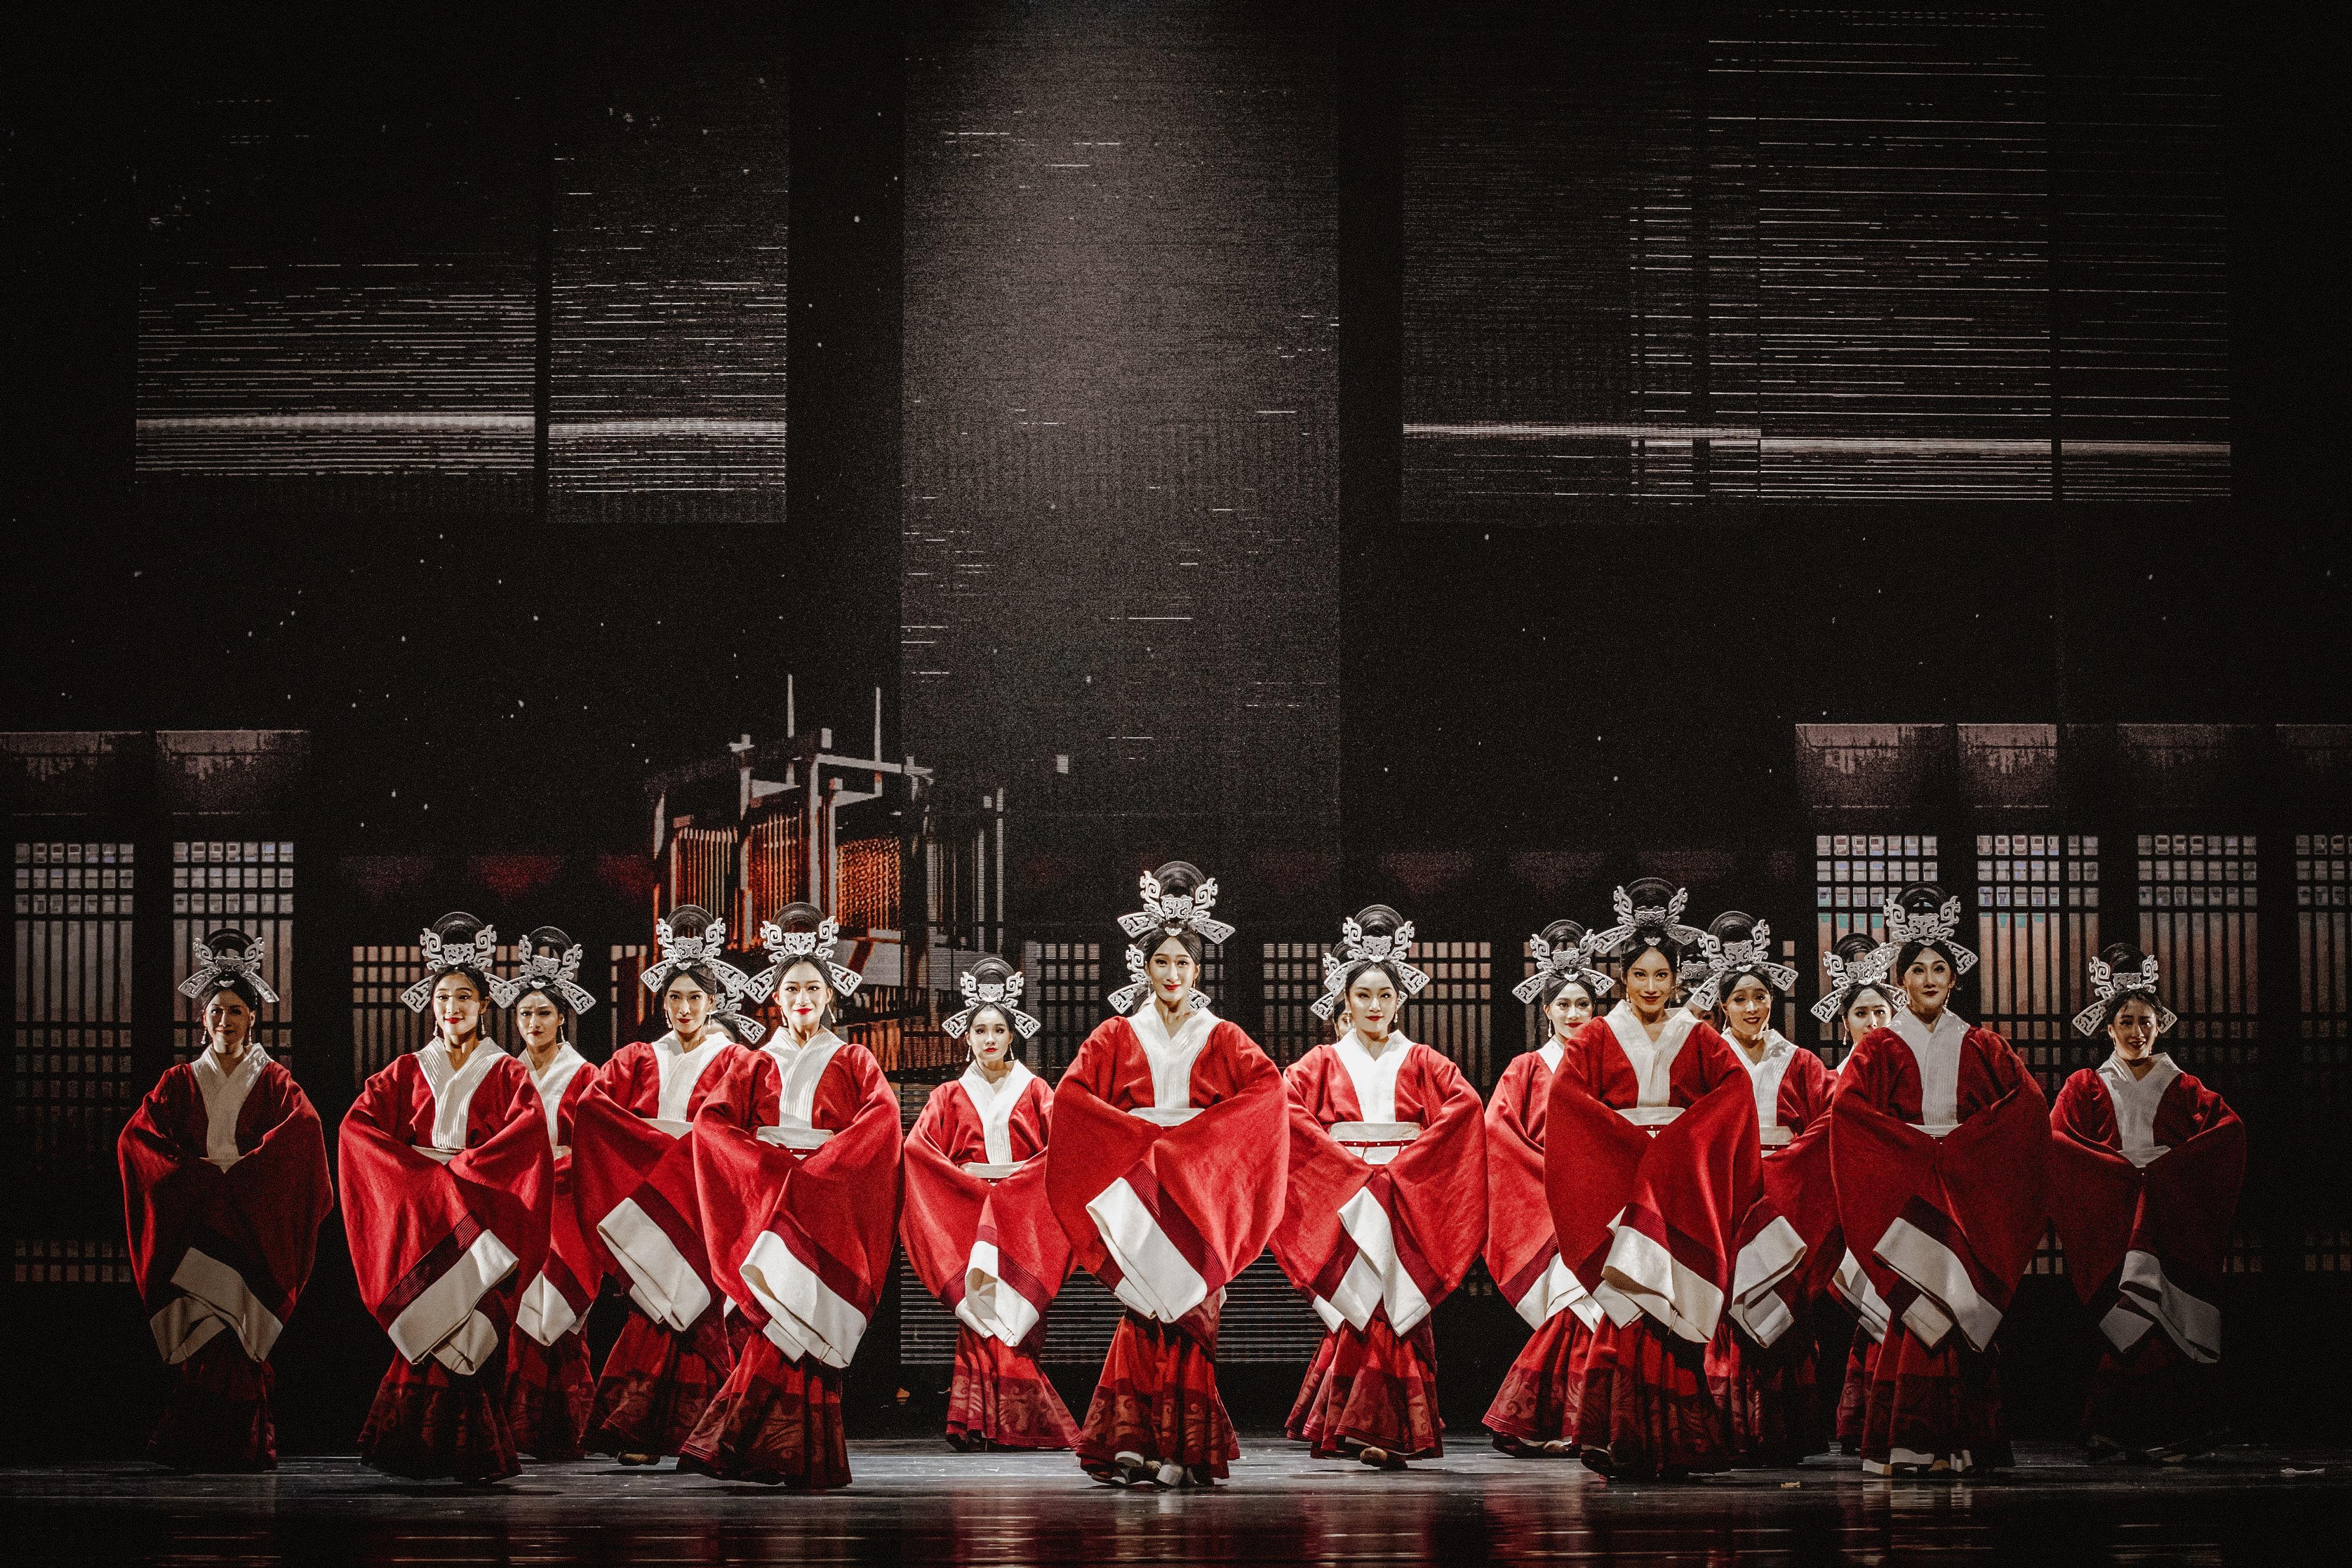 The opening programme of the inaugural Chinese Culture Festival, dance drama "Five Stars Rising in the East" by the Beijing Dance Drama and Opera, will be staged in Hong Kong in June. Photo shows a scene from "Five Stars Rising in the East".